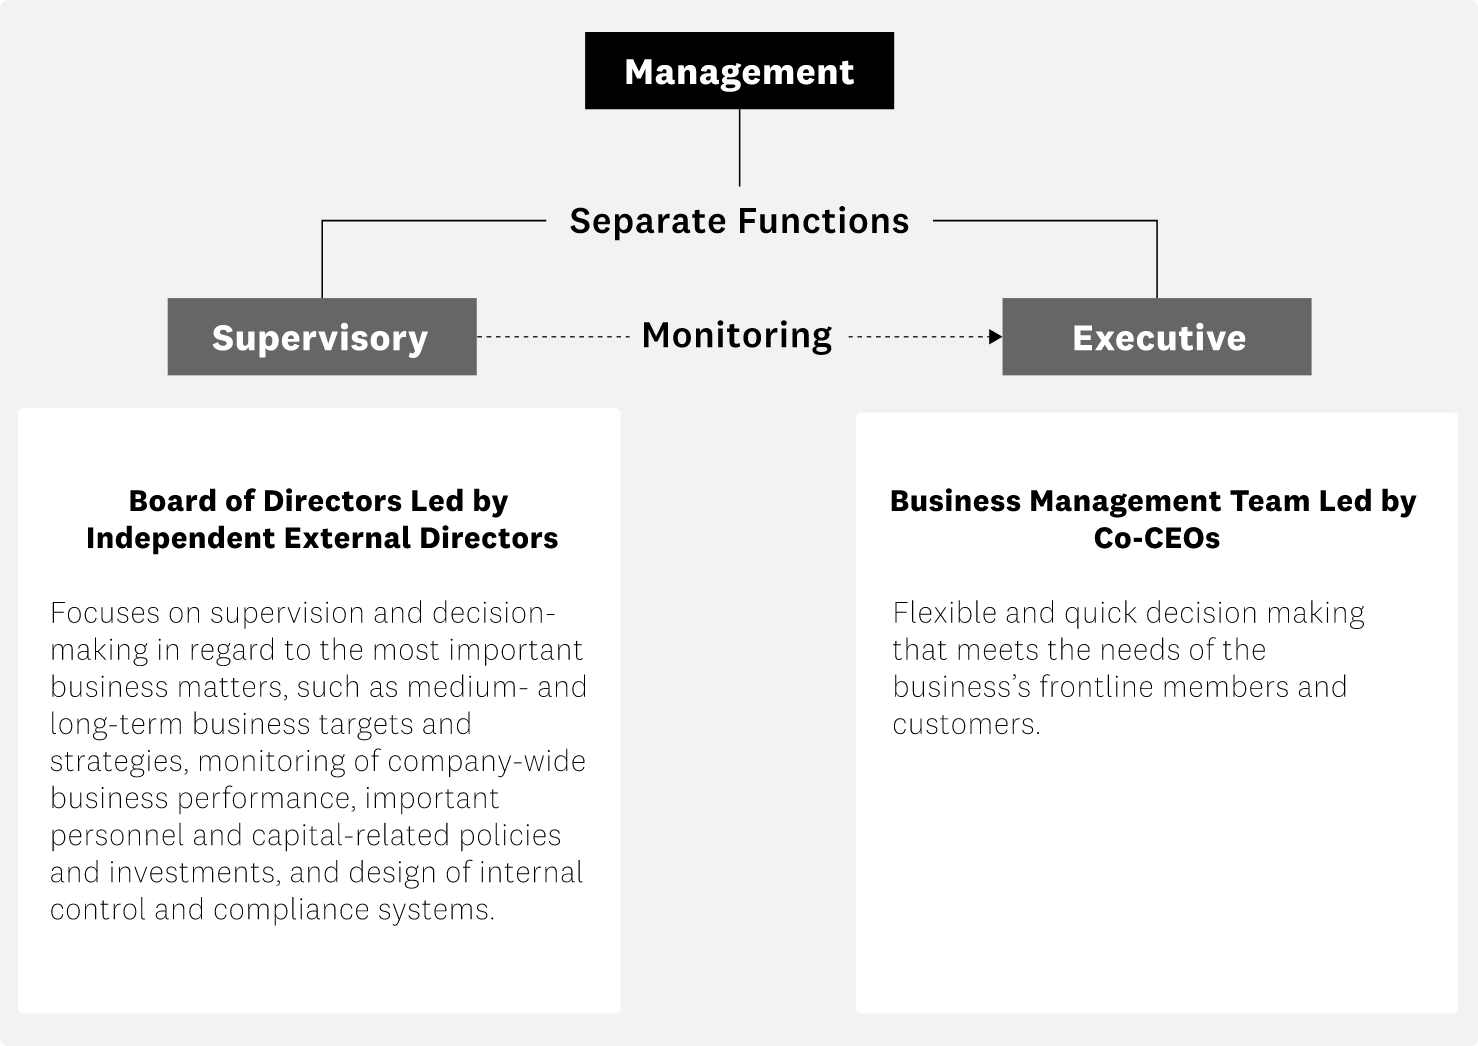 Responsibilities of Directors and Delegation to Management Team